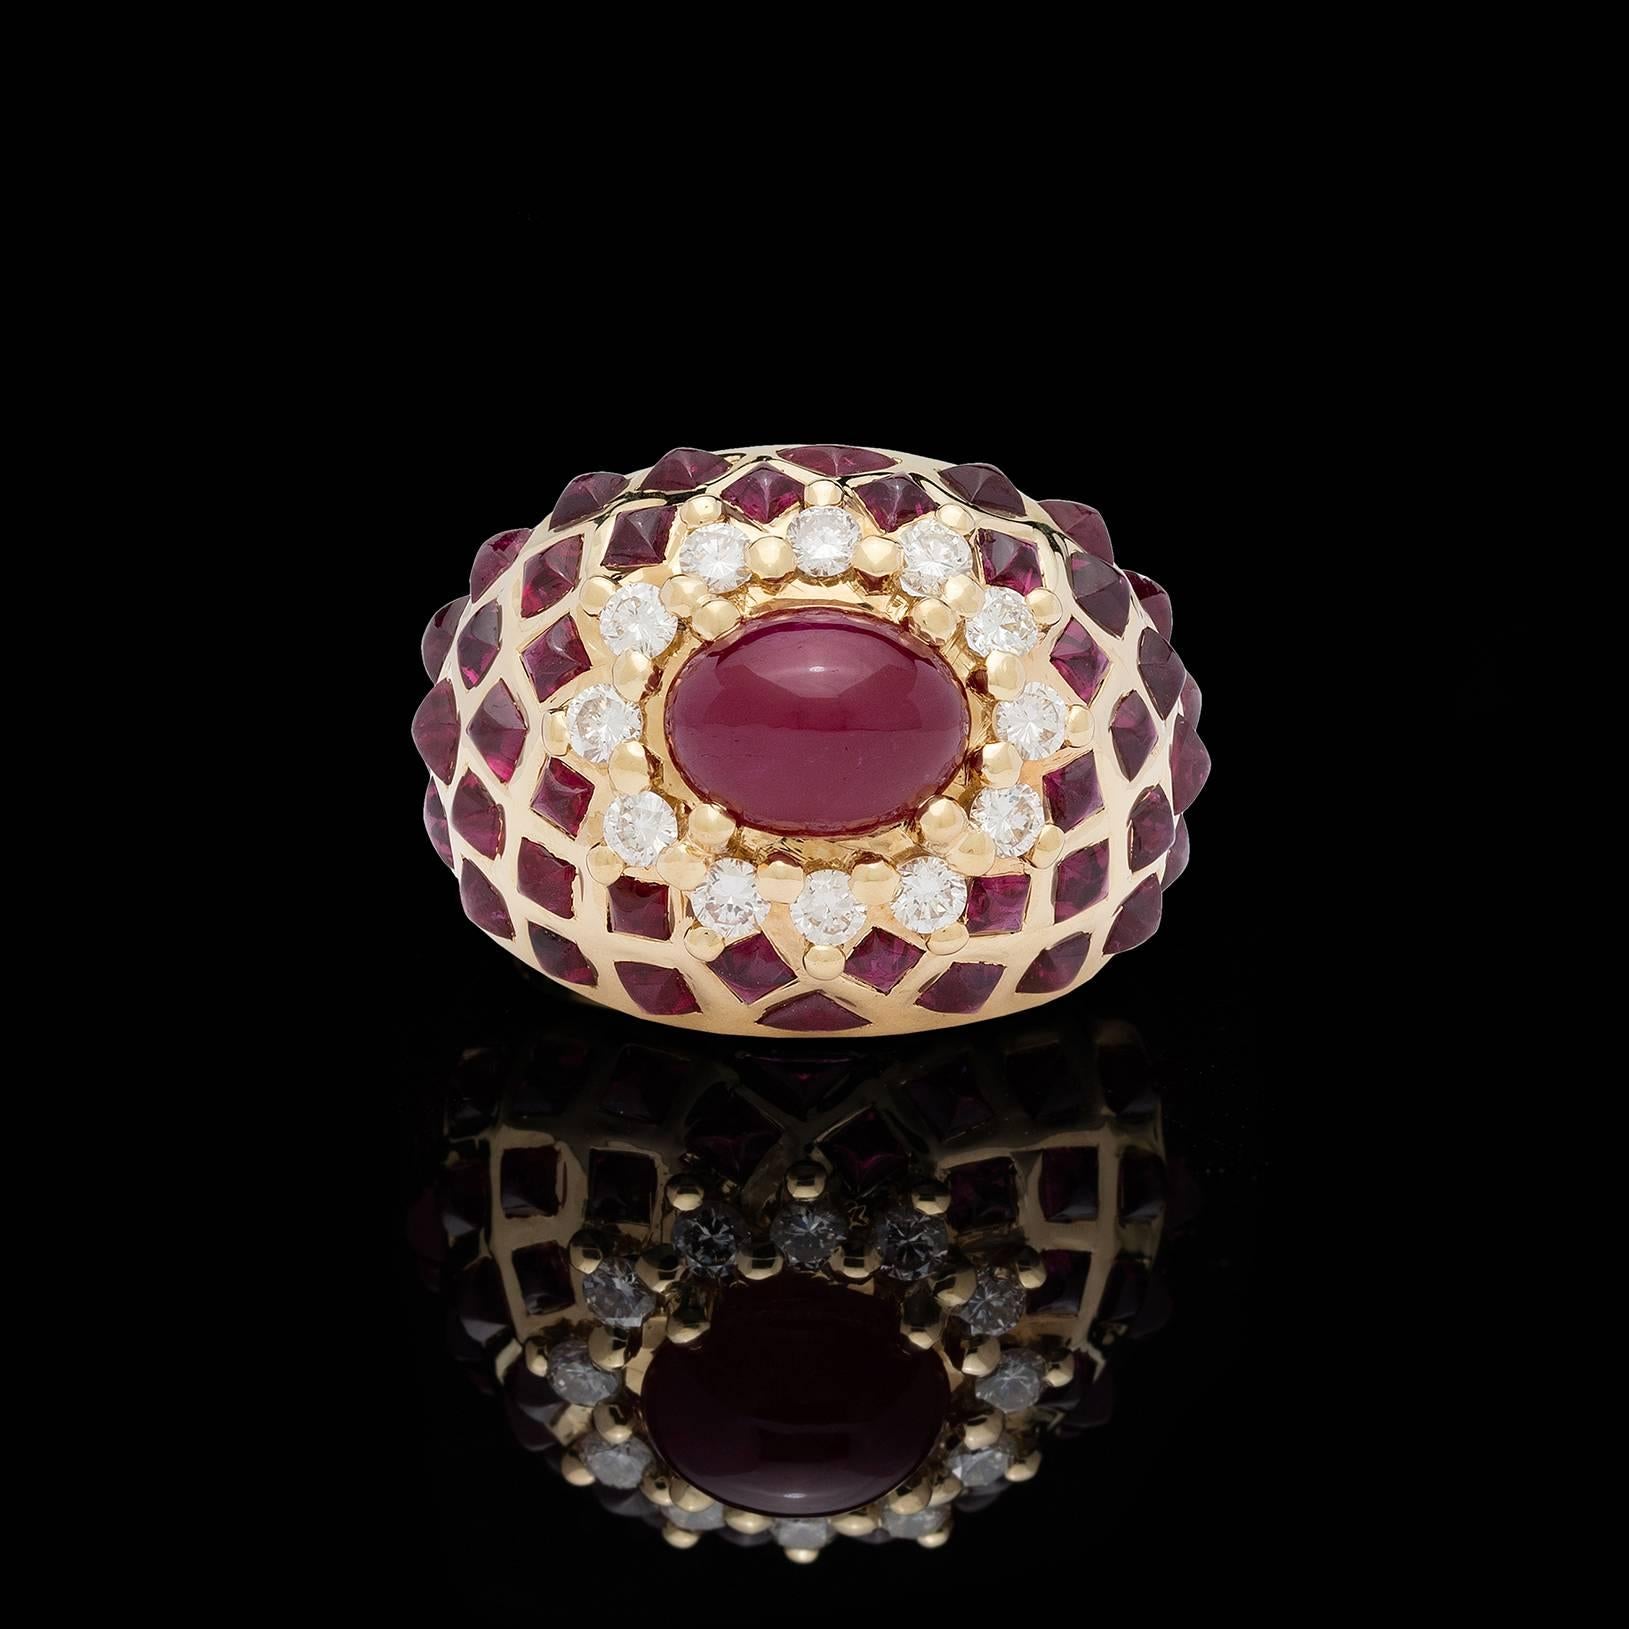 Decadent vintage ruby and diamond ring featuring an oval cabochon ruby measuring approximately 9.25mm by 7.5mm prong set within a halo of 12 round brilliant cut diamonds totaling approximately 0.60 carat. The additional rubies set in a lattice